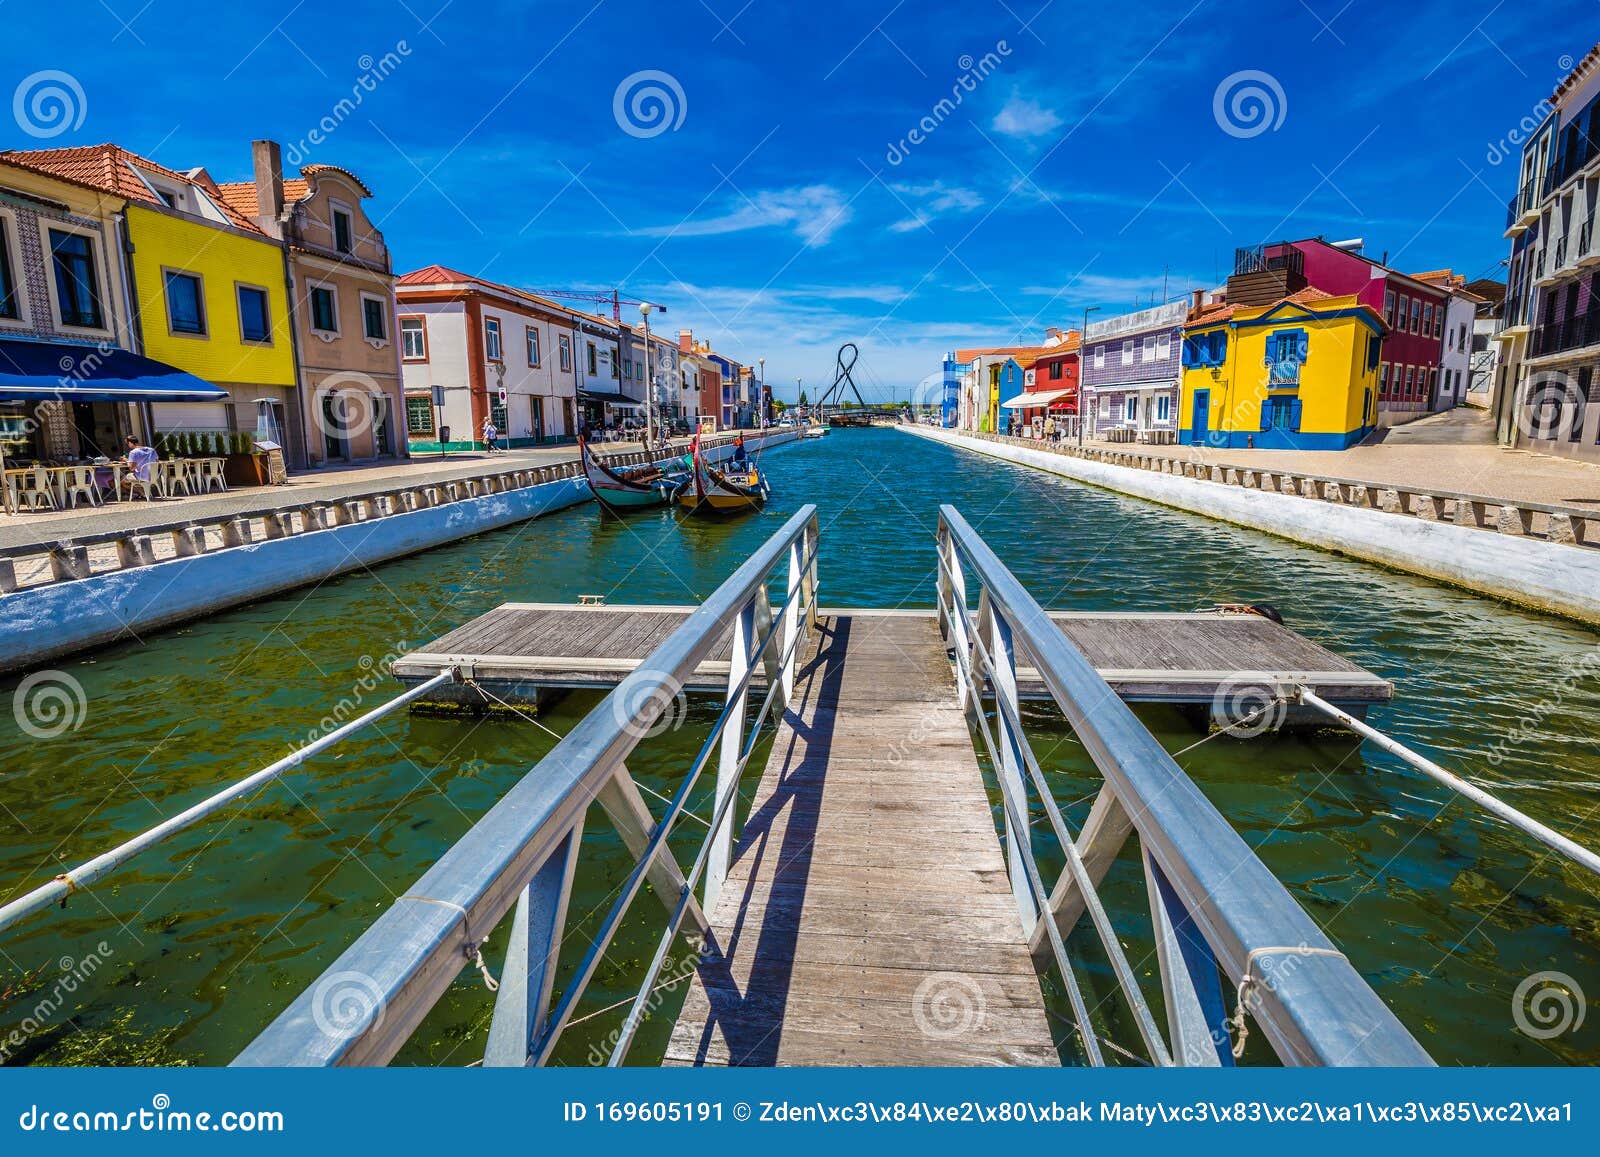 colorful buildings and boats - aveiro, portugal